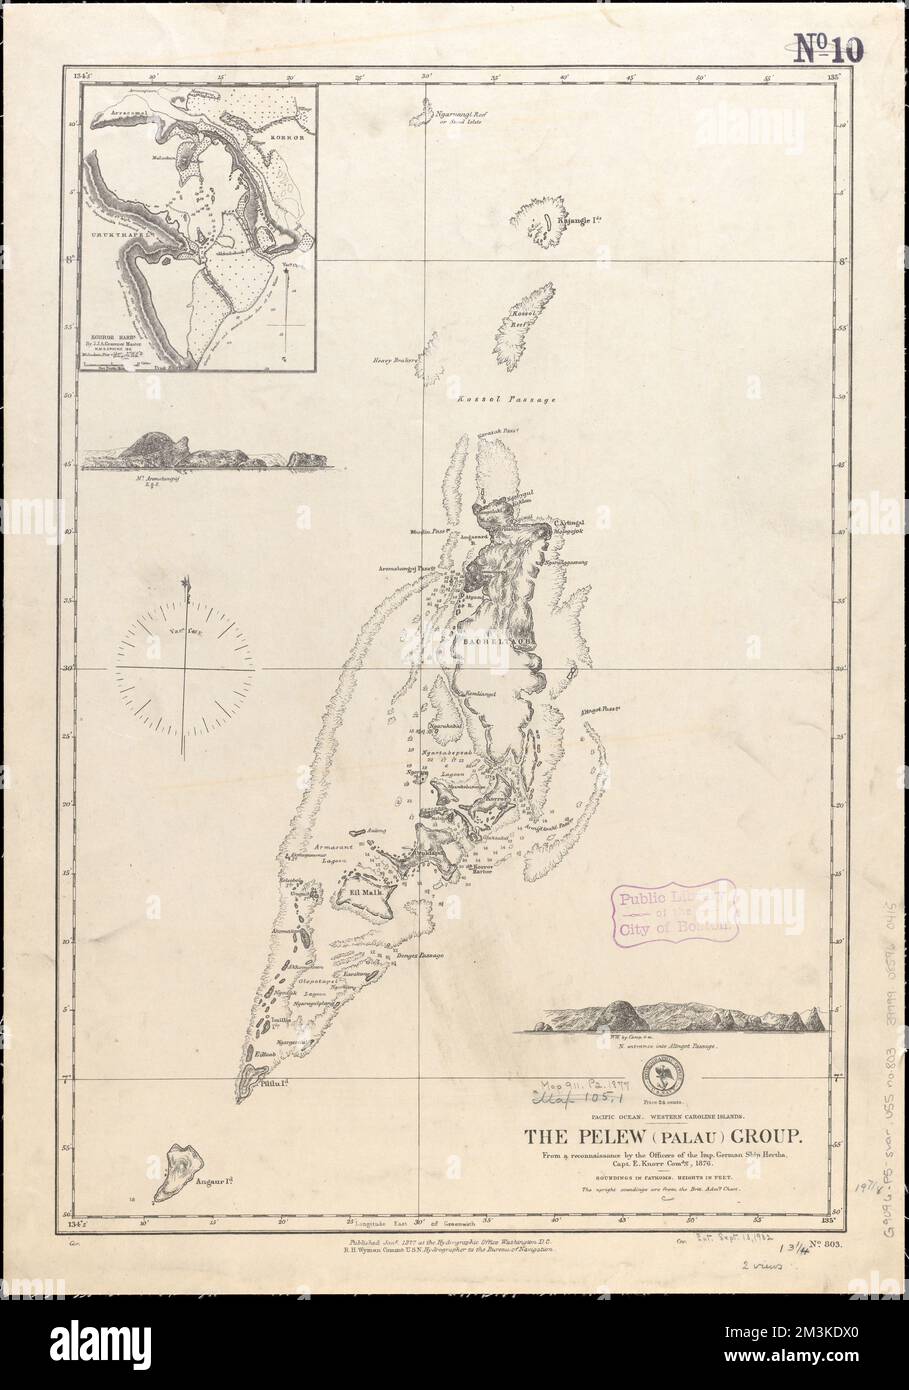 Pacific Ocean, western Caroline Islands, the Pelew (Palau) Group : from a reconnaissance by the officers of the Imp. German ship Hertha, Capt. E. Knorr comdg, 1876 , Palau, Maps, Nautical charts, Palau Norman B. Leventhal Map Center Collection Stock Photo